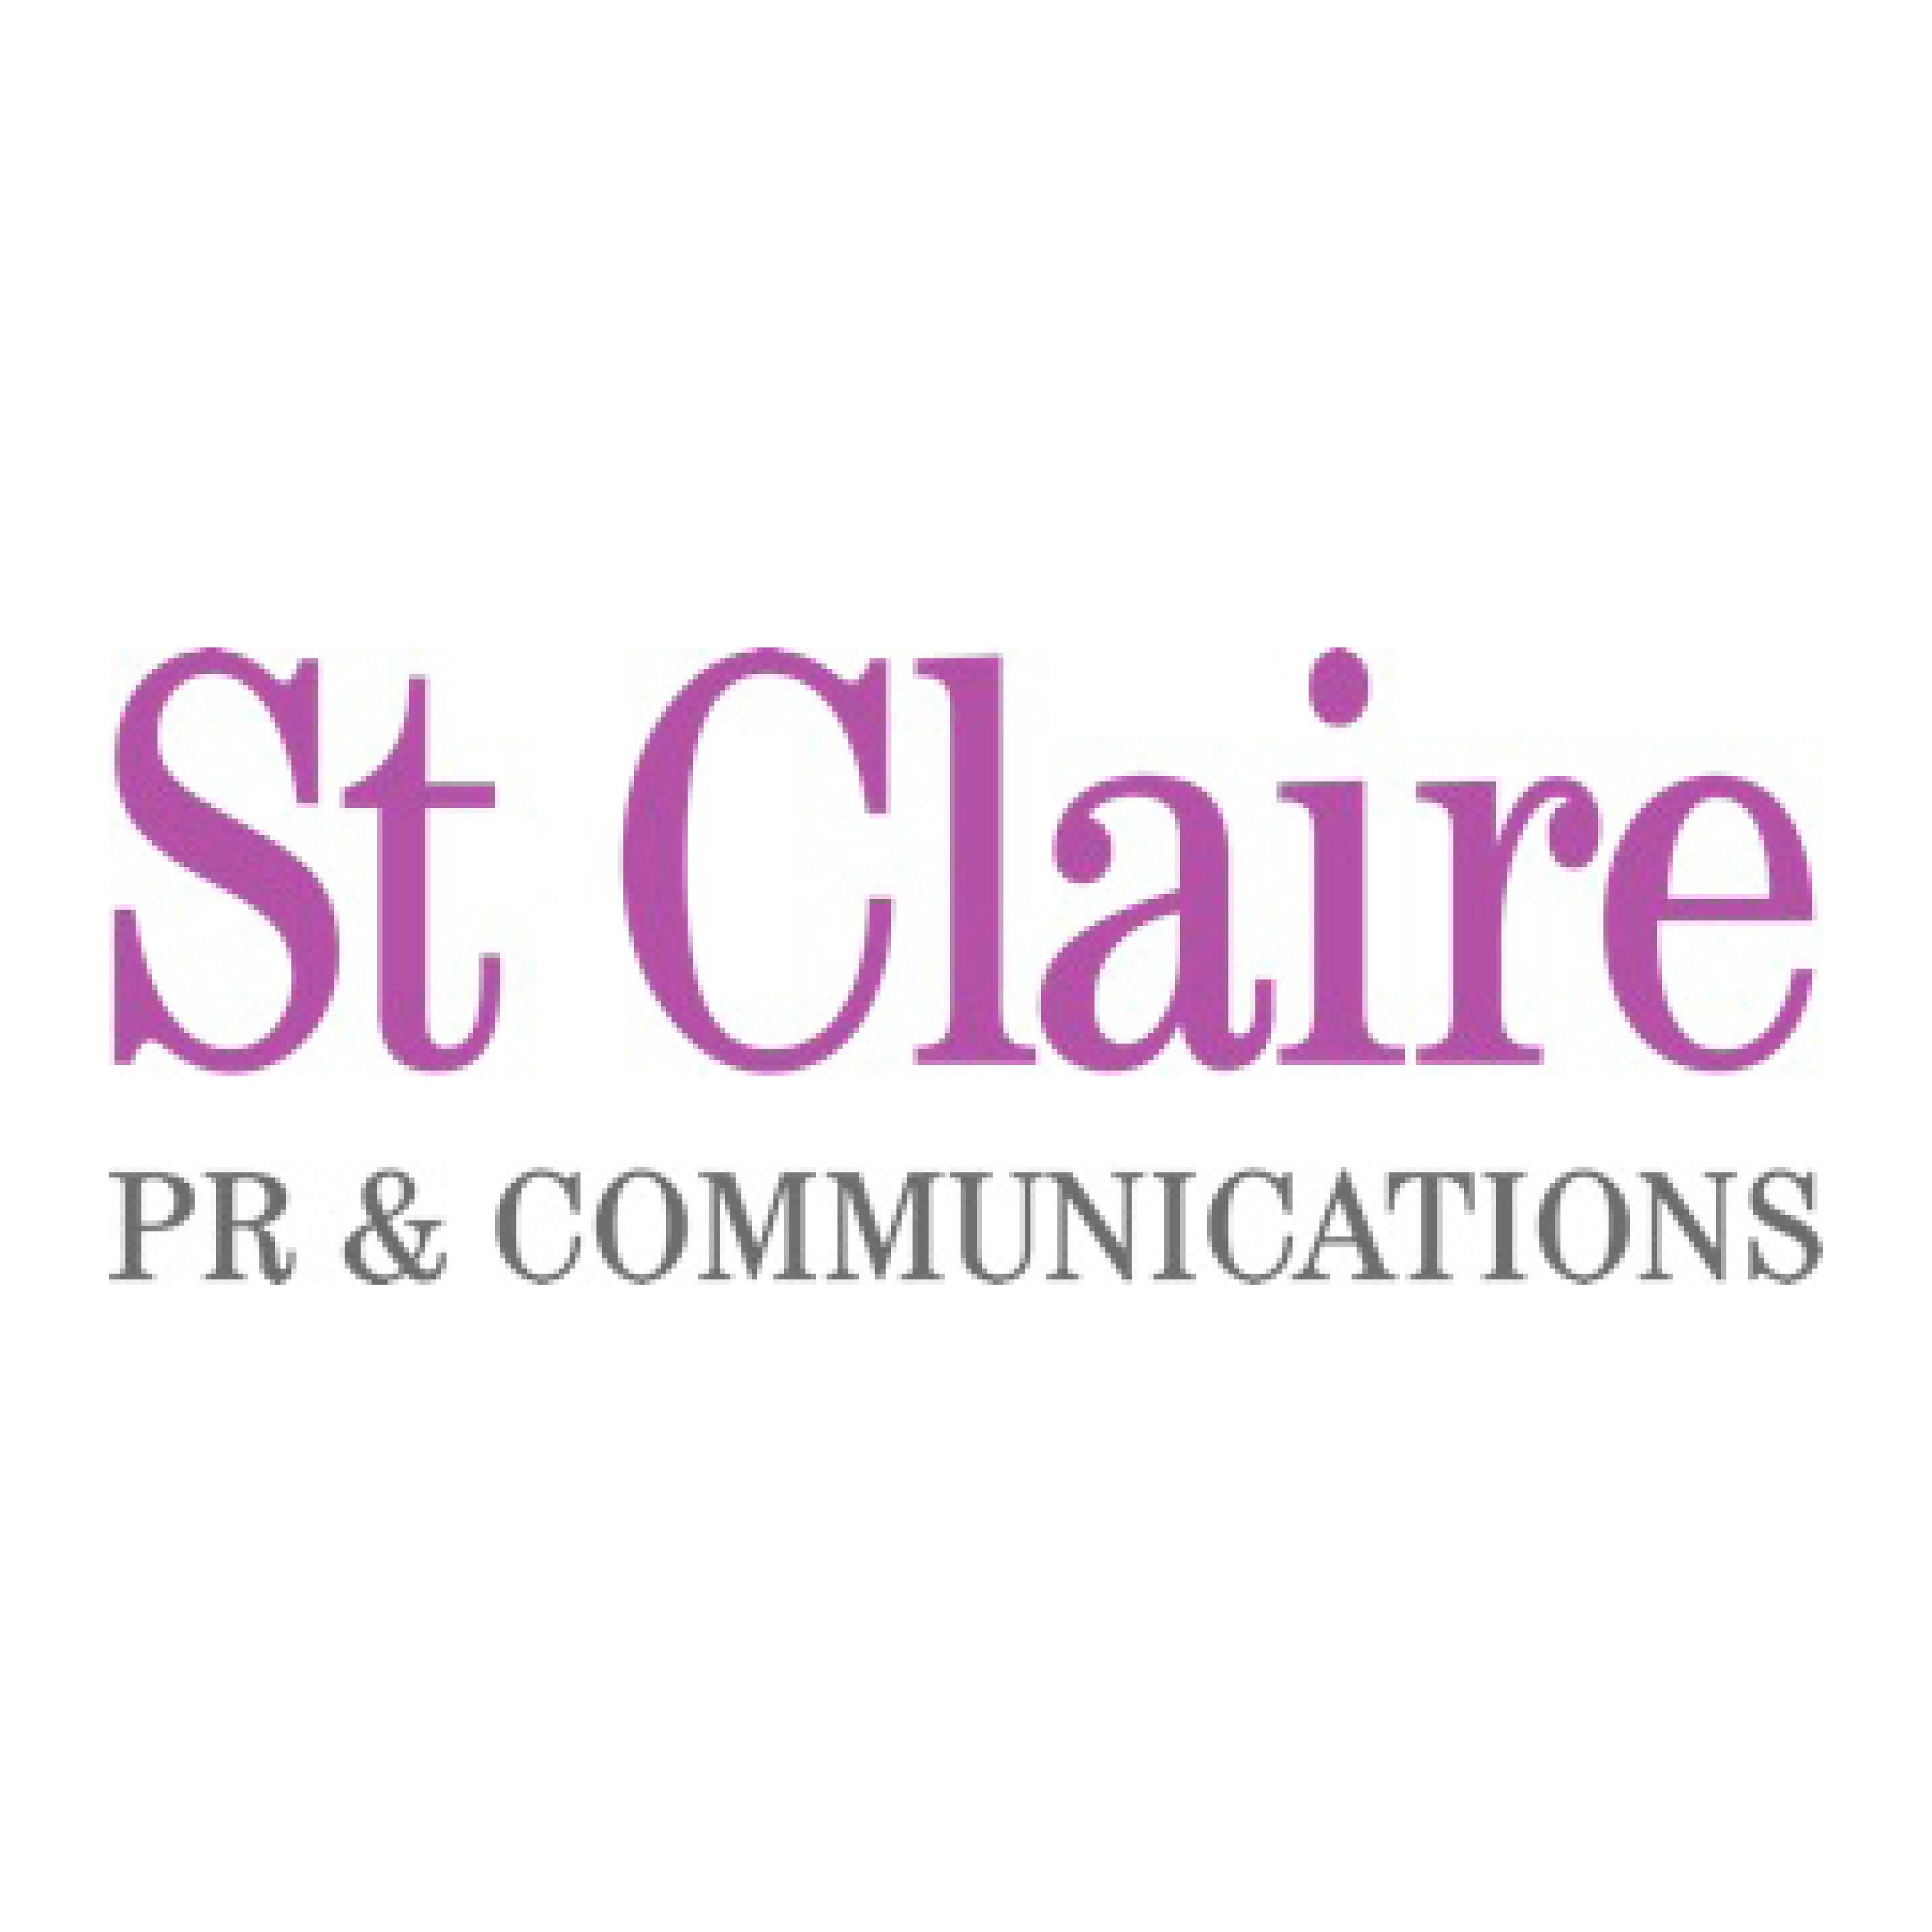 Public relations, communication and events consultant